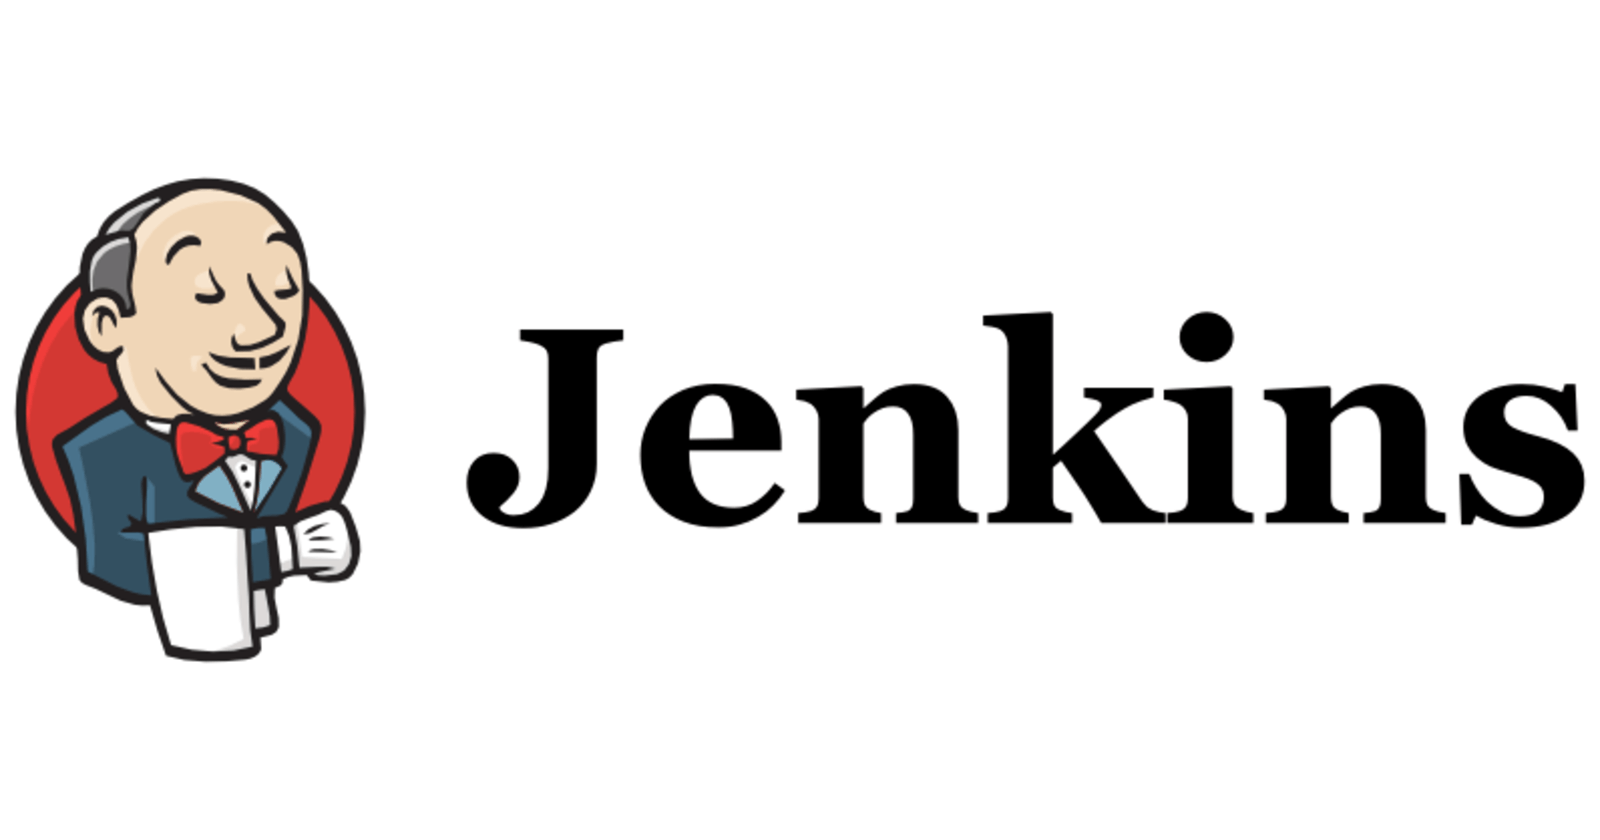 How to add Jenkins remote build agent based on Ubuntu 18.04